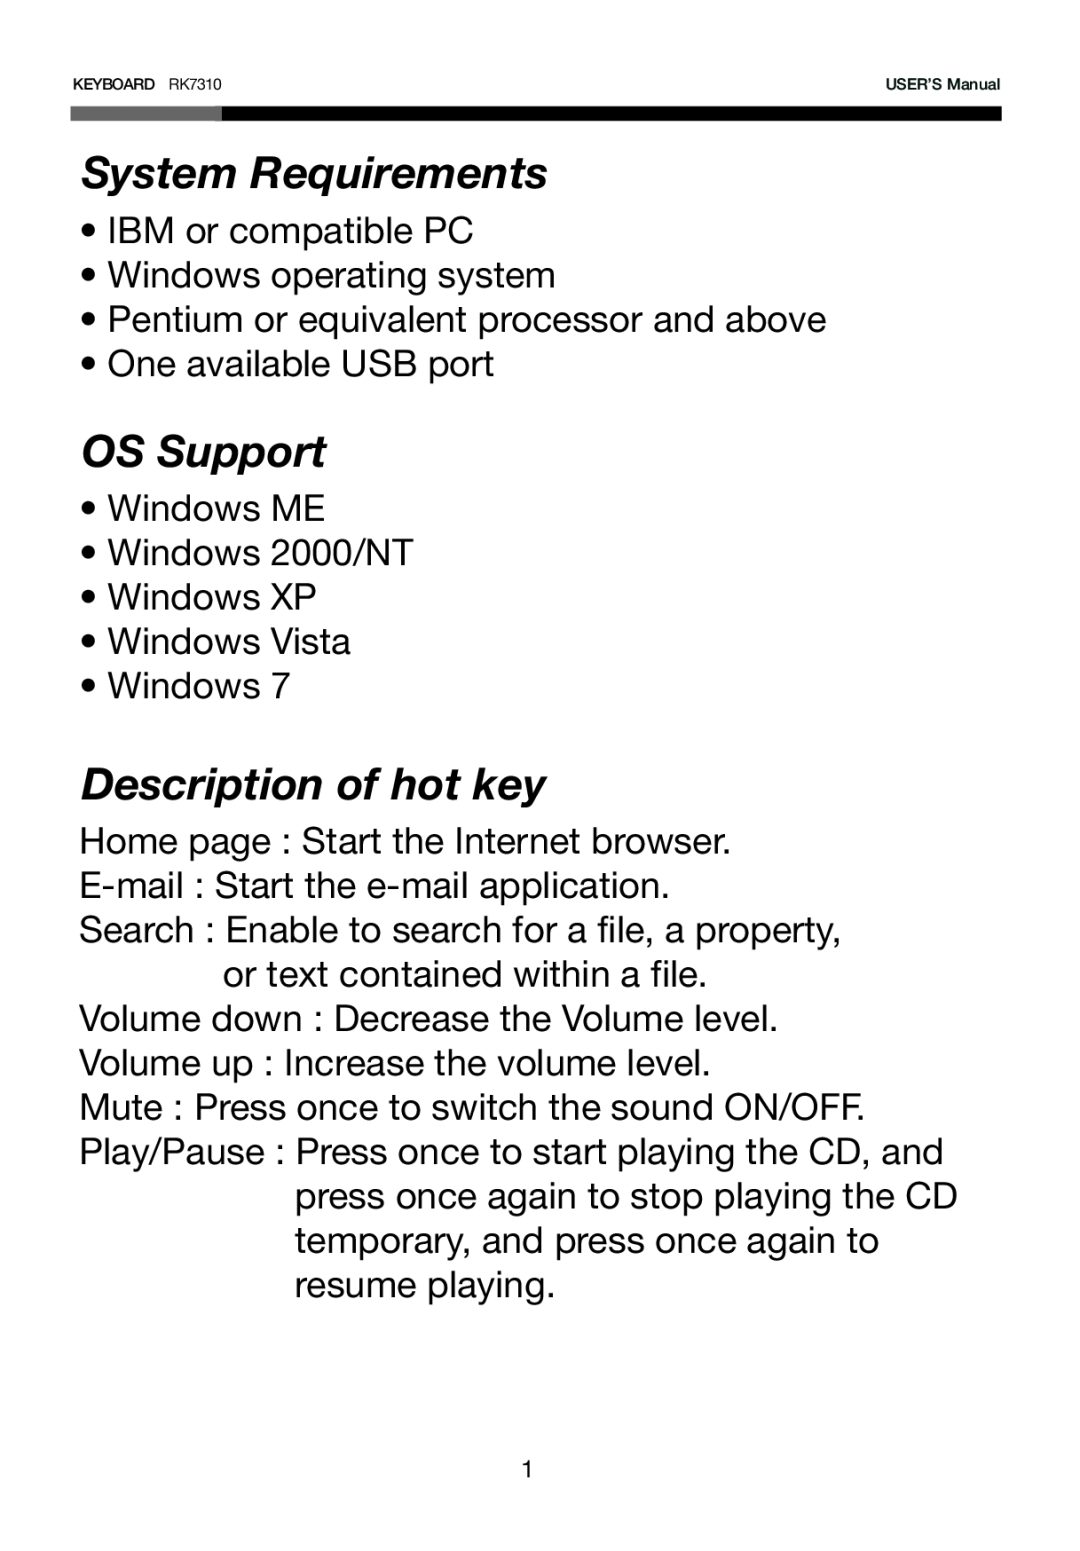 Rosewill RK-7310 user manual System Requirements, OS Support, Description of hot key 